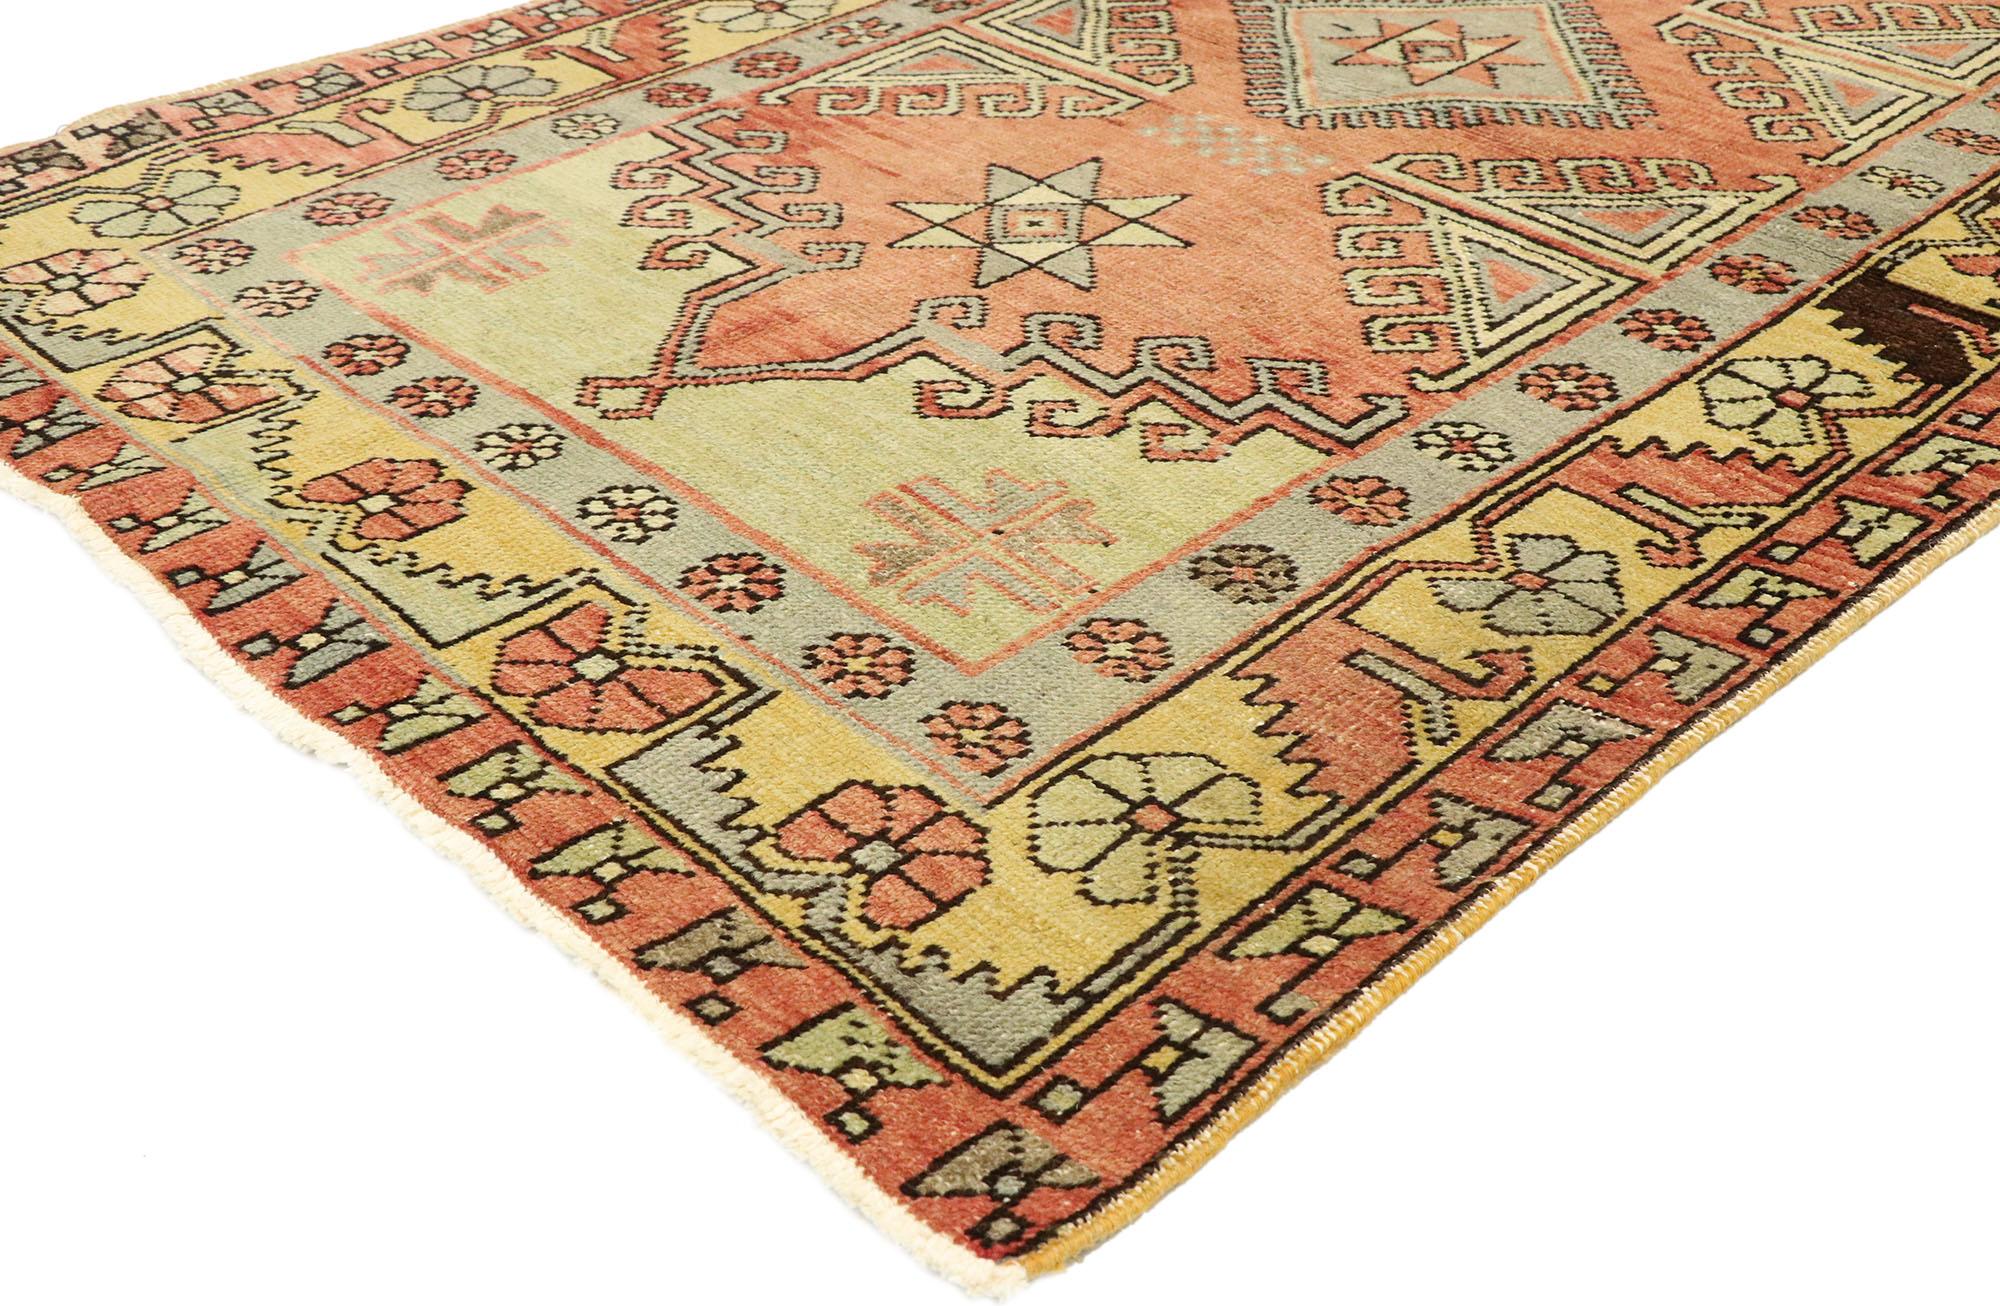 51315 Vintage Turkish Oushak Rug, 03'05 X 05'04. Tribal enchantment intertwines with Anatolian history in this hand-knotted wool vintage Turkish Oushak rug. At the heart of the composition lies a serrated diamond lozenge, flanked by radiant